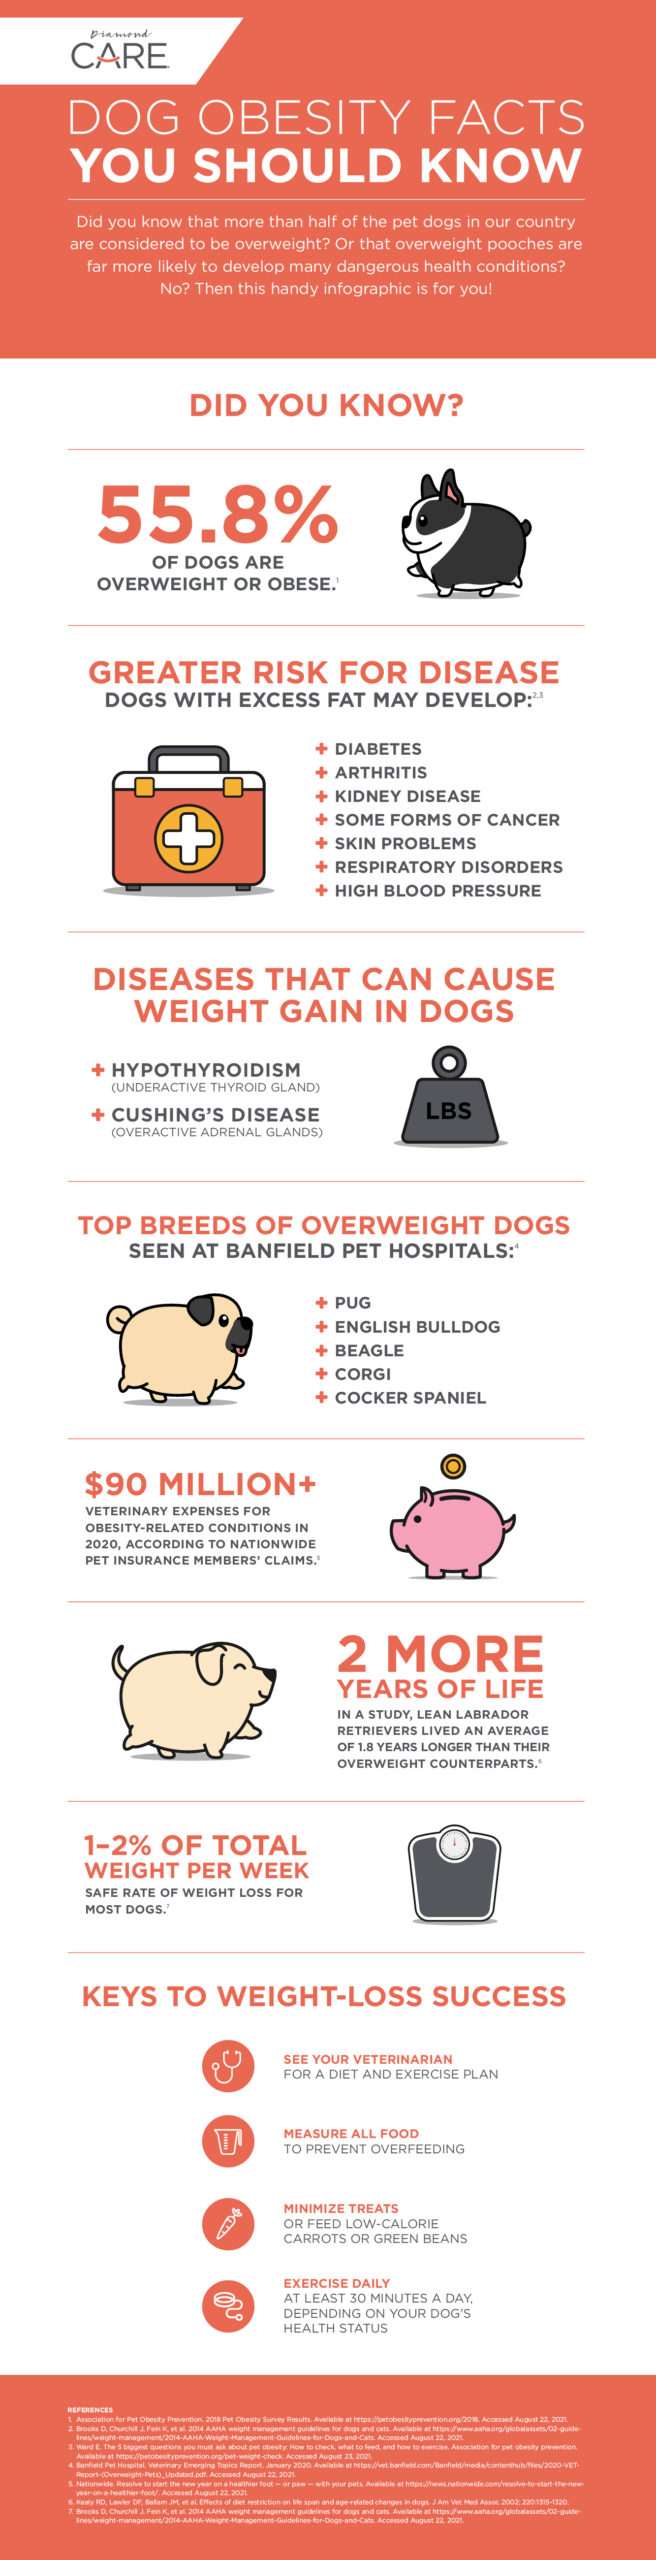 Infographic: Dog Obesity Facts You Should Know | Diamond Pet Foods